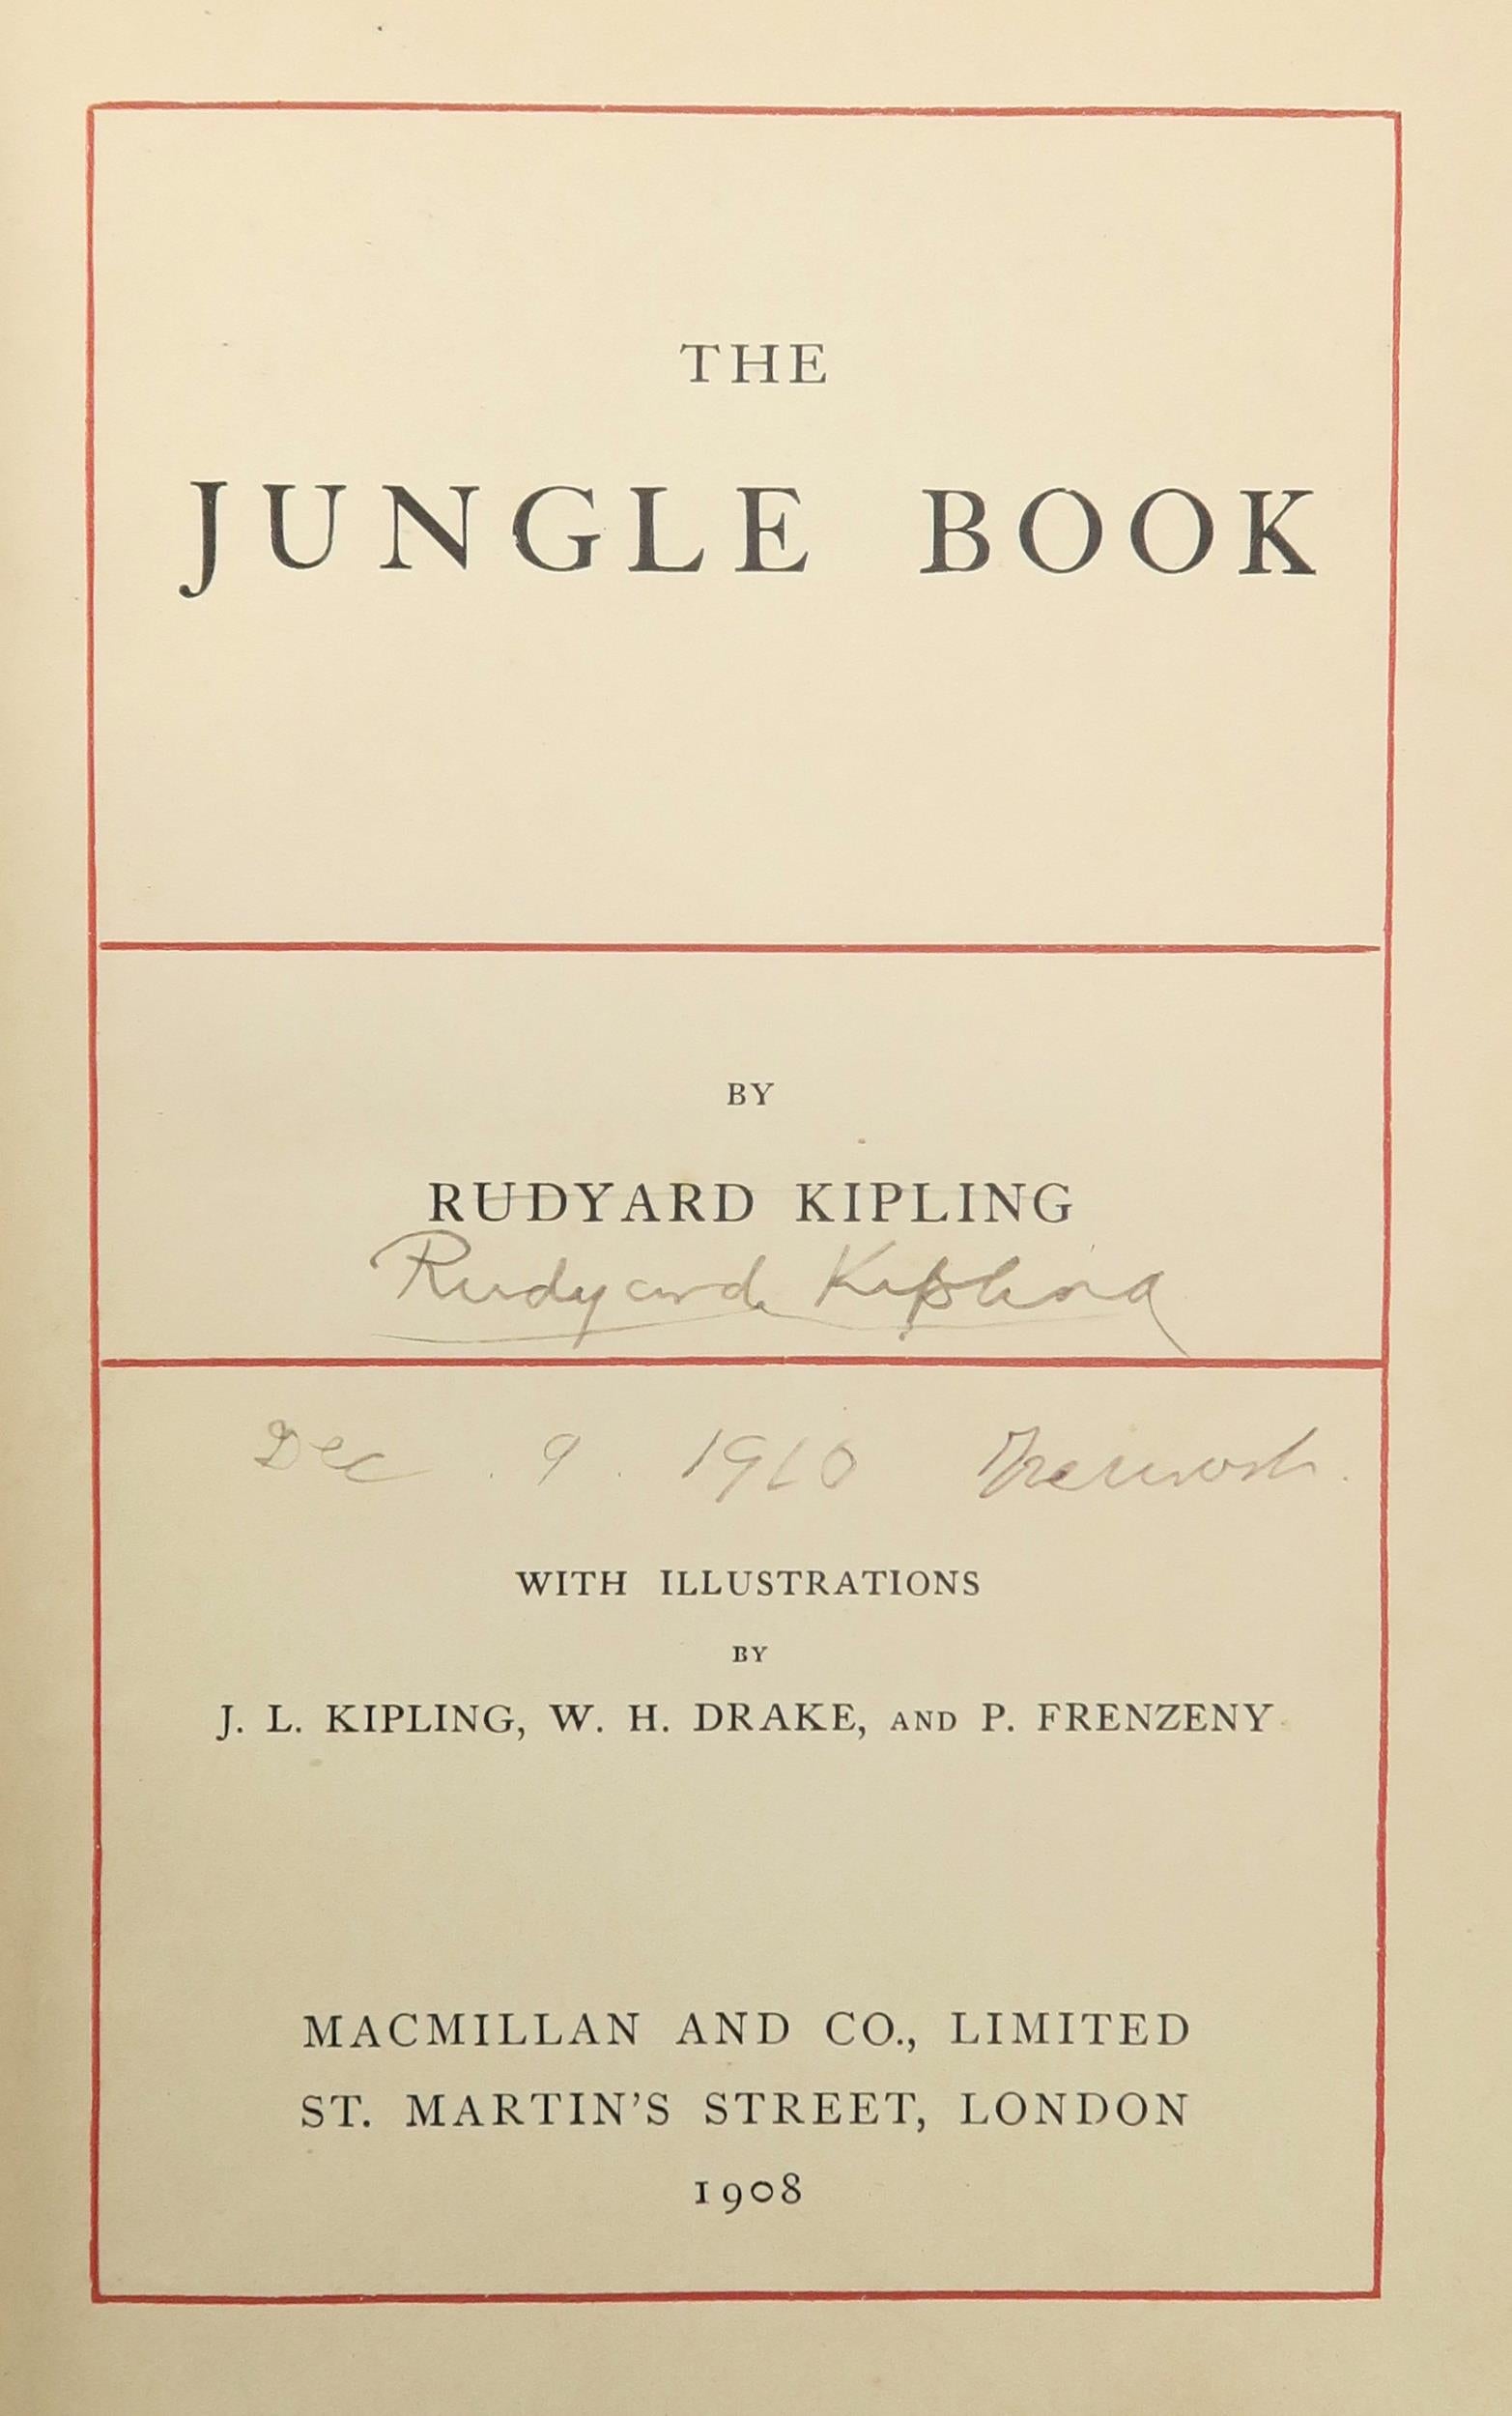 THE JUNGLE BOOK 1908 SIGNED BY RUDYARD KIPLING